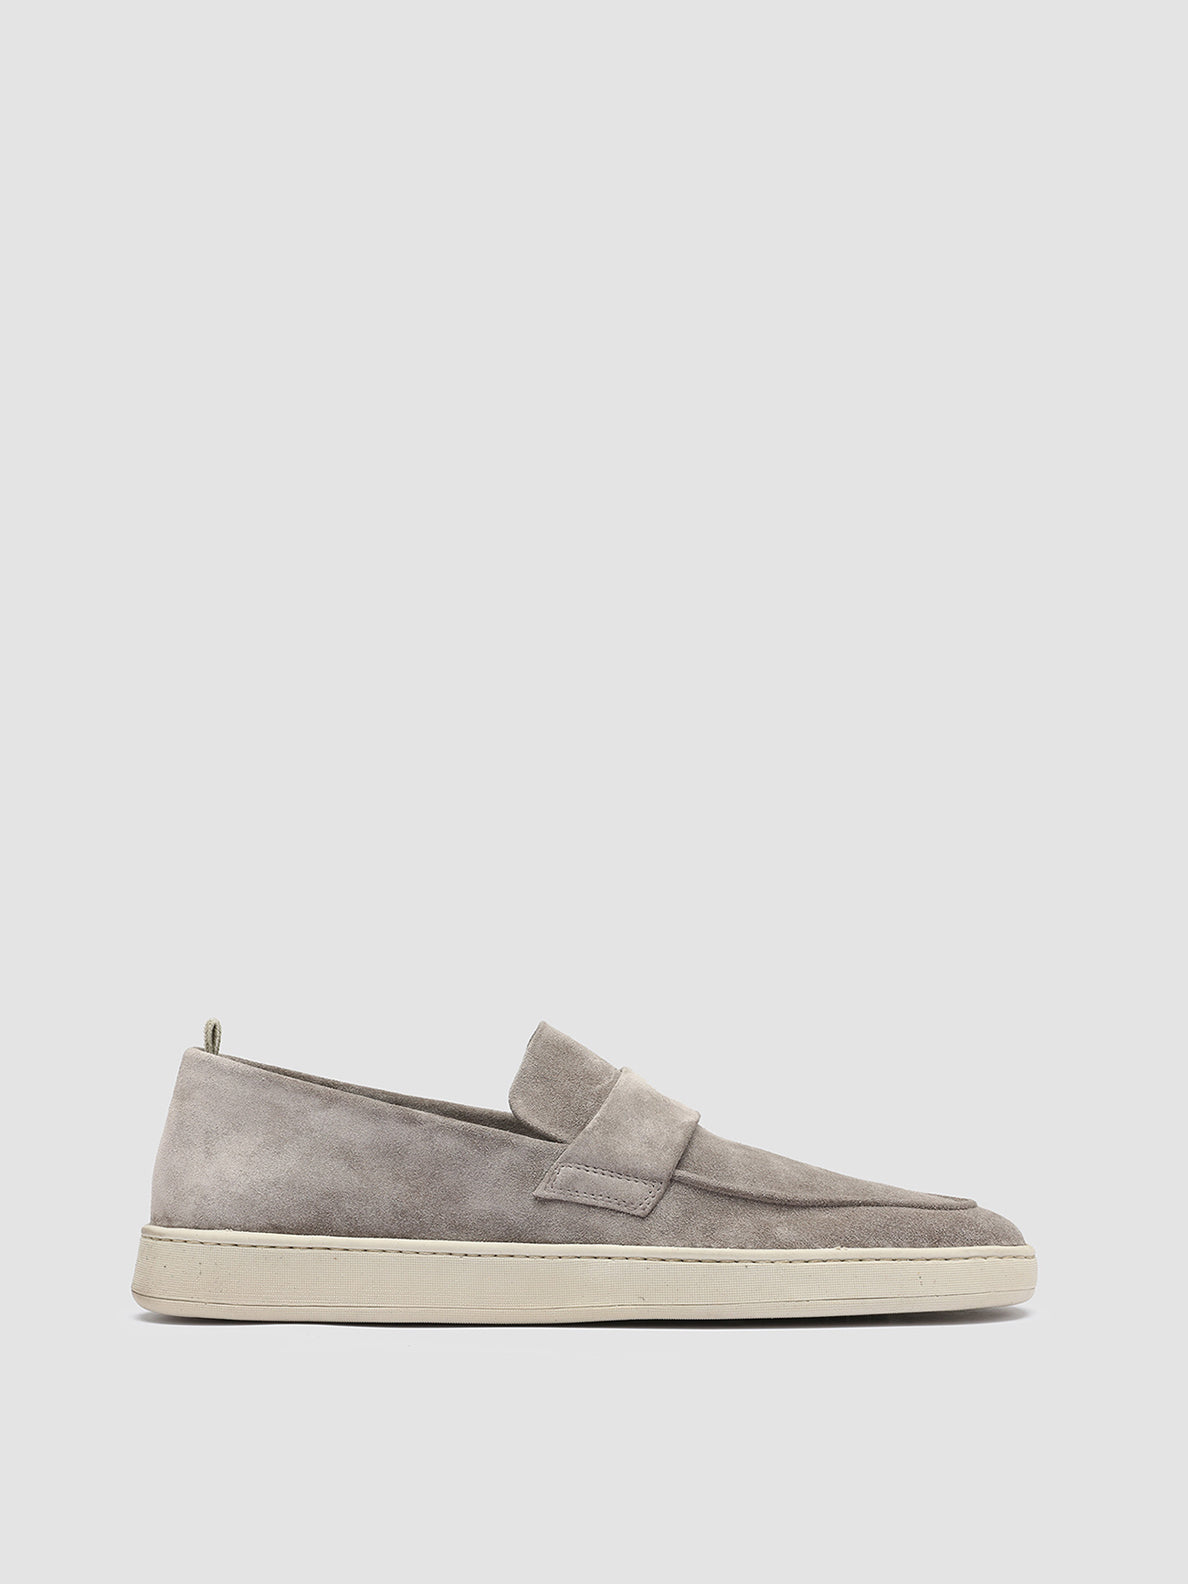 Men's Suede Penny Loafers: HERBIE 001 – Officine Creative USA